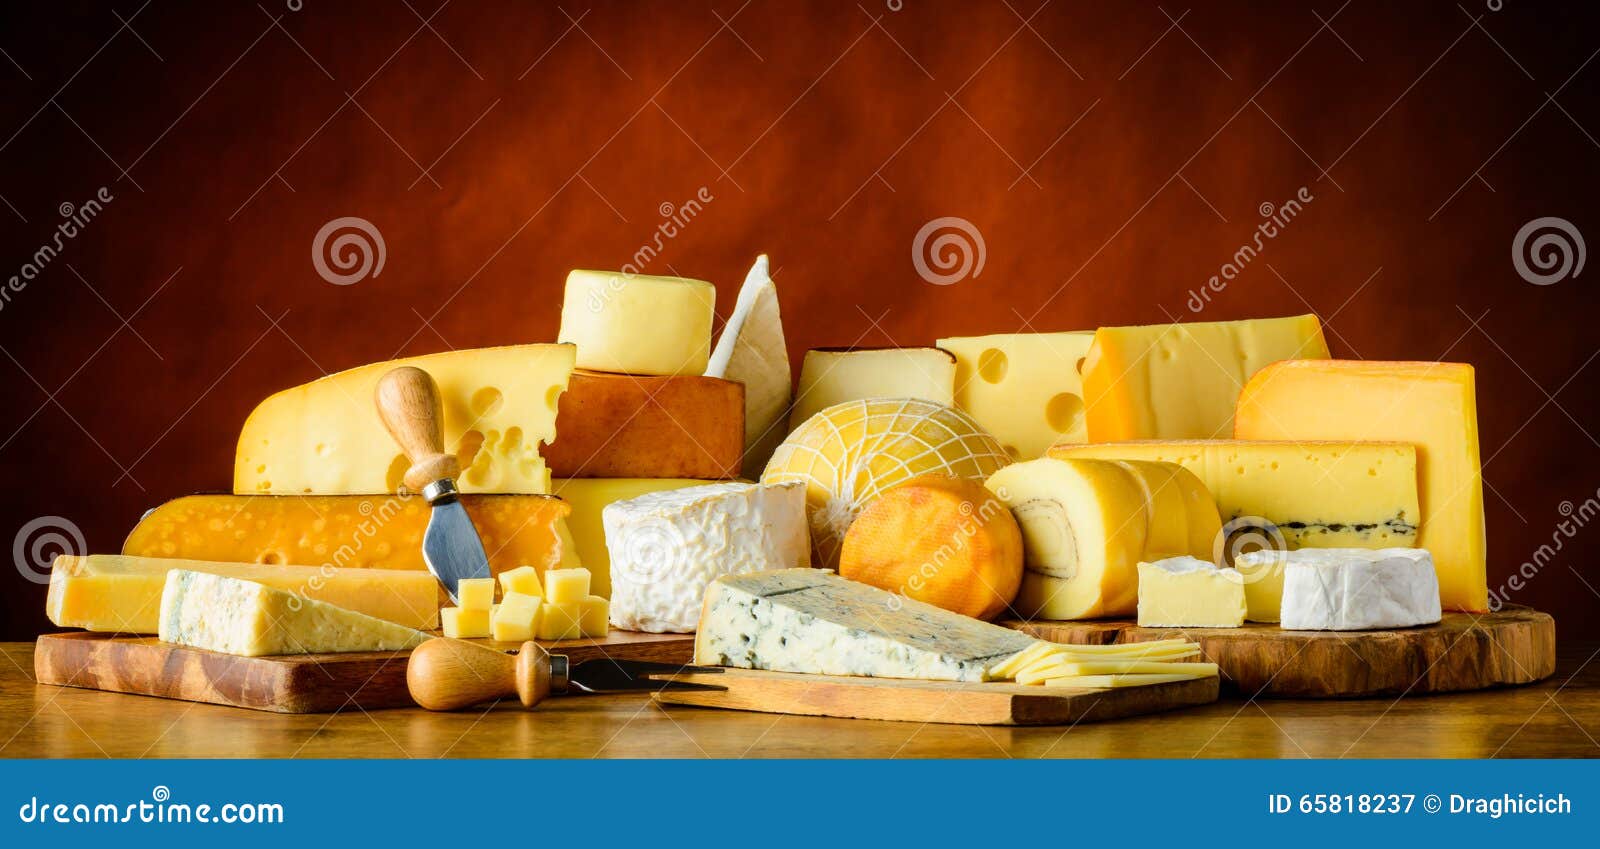 cheese in still life